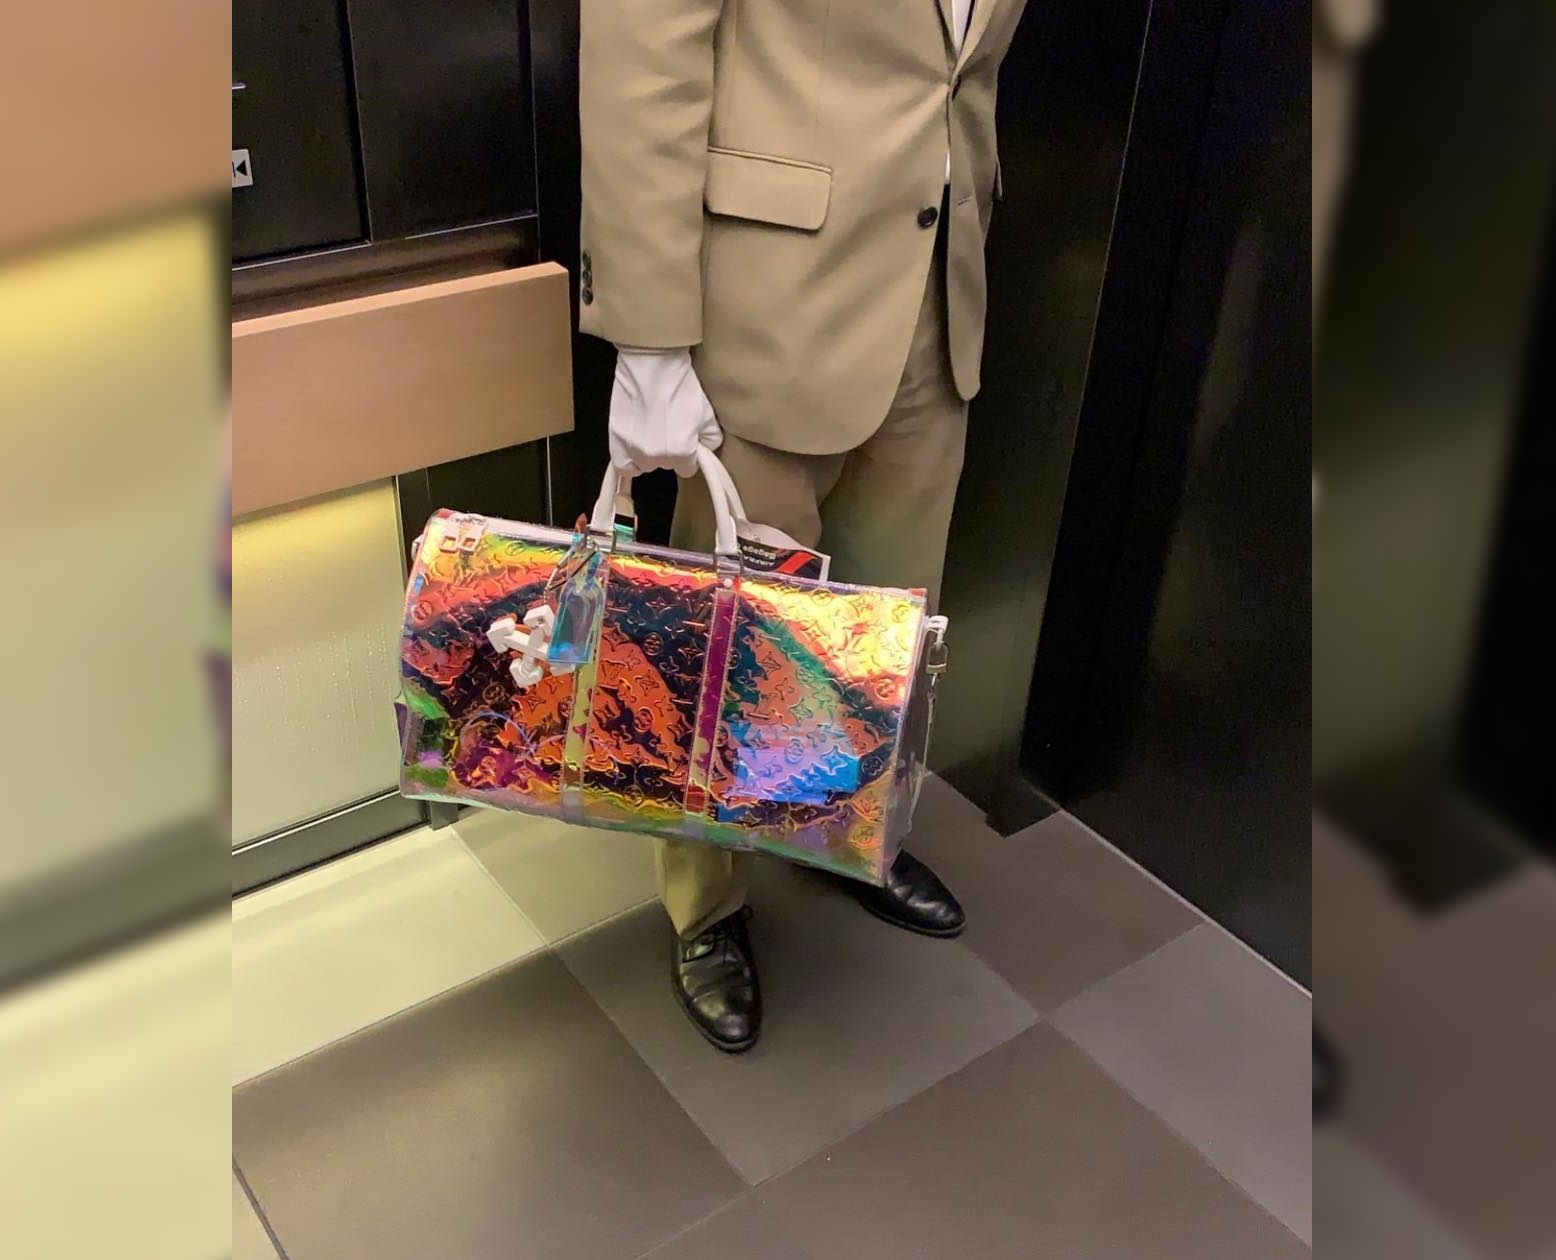 SPOTTED: Virgil Abloh’s Louis Vuitton SS19 Travel Bag in Tokyo